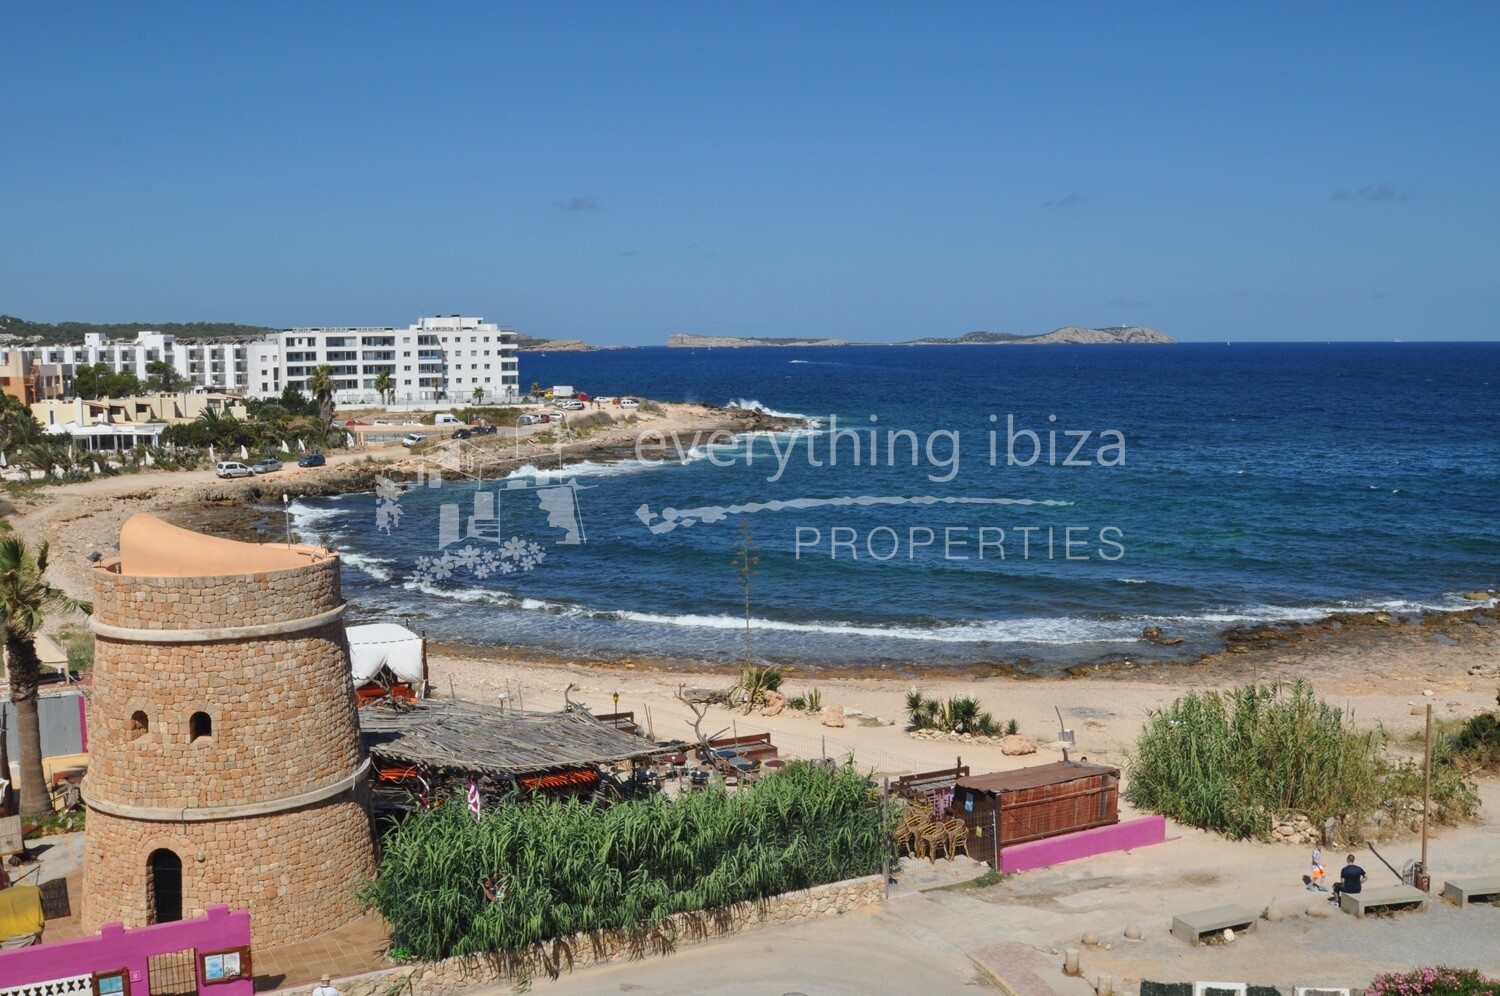 Coastline Penthouse with Roof Terrace & Sea Views, ref. 1436, for sale in Ibiza by everything ibiza Properties